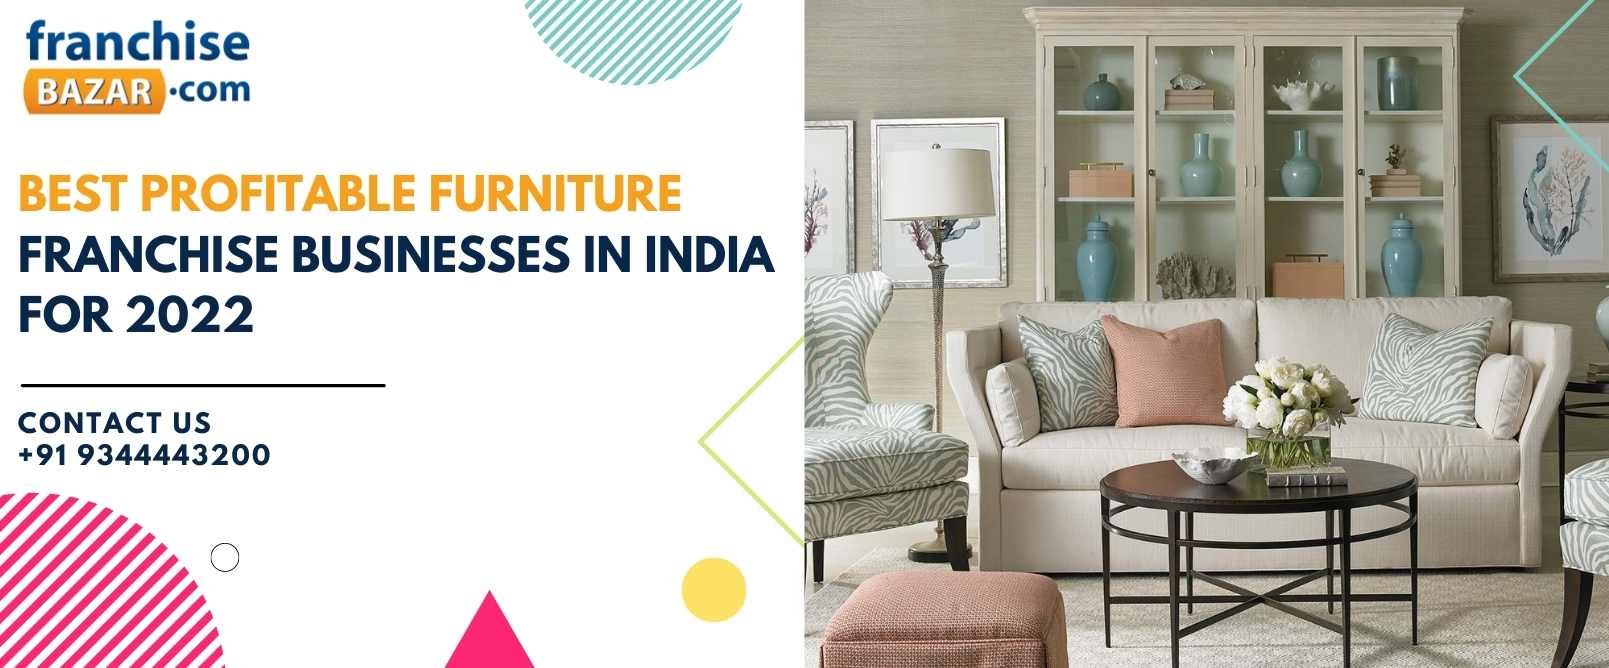 Best Profitable Furniture Franchise Businesses In India For 2022	